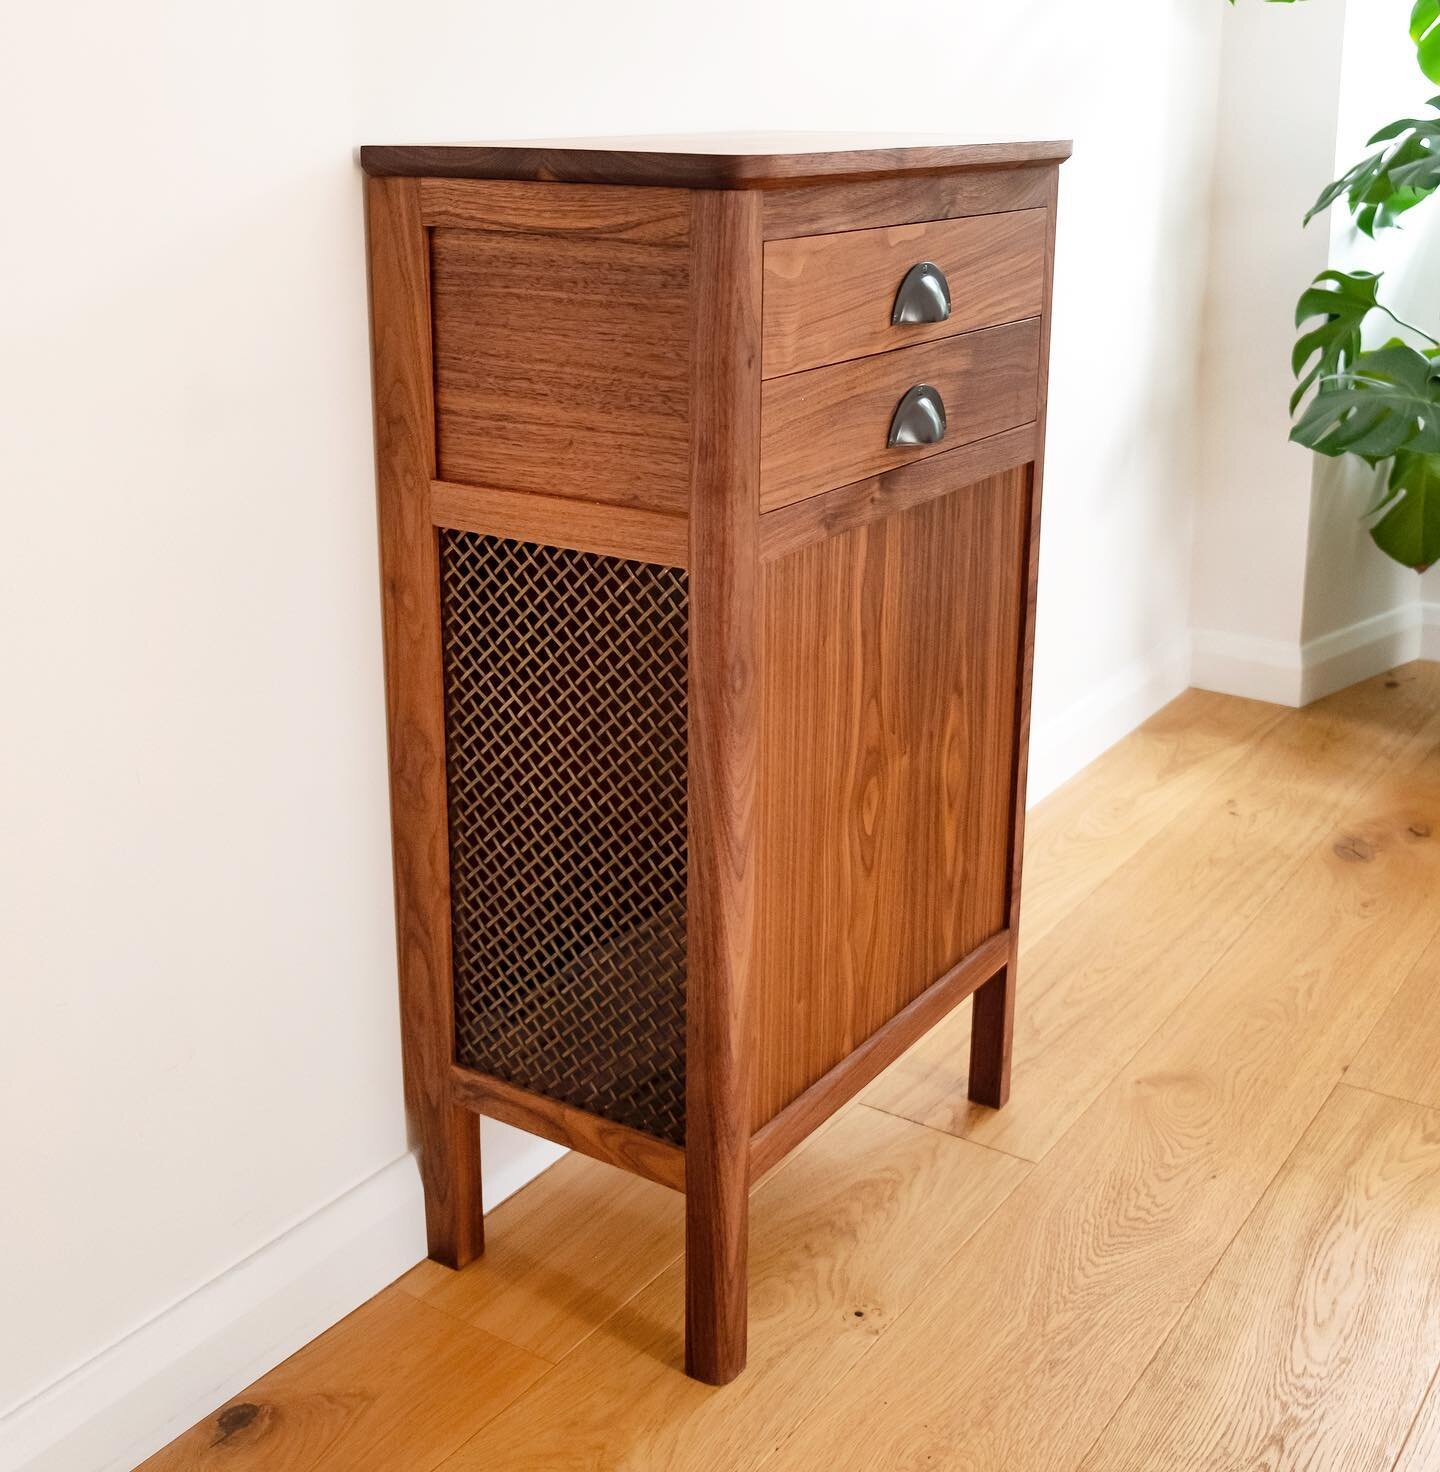 This walnut hall cabinet is built specifically to hold the client&rsquo;s air purifier and provide a docking space for the robot Hoover underneath. The brass mesh allows for ample flow for the purifier and the height below is just right for the vacuu